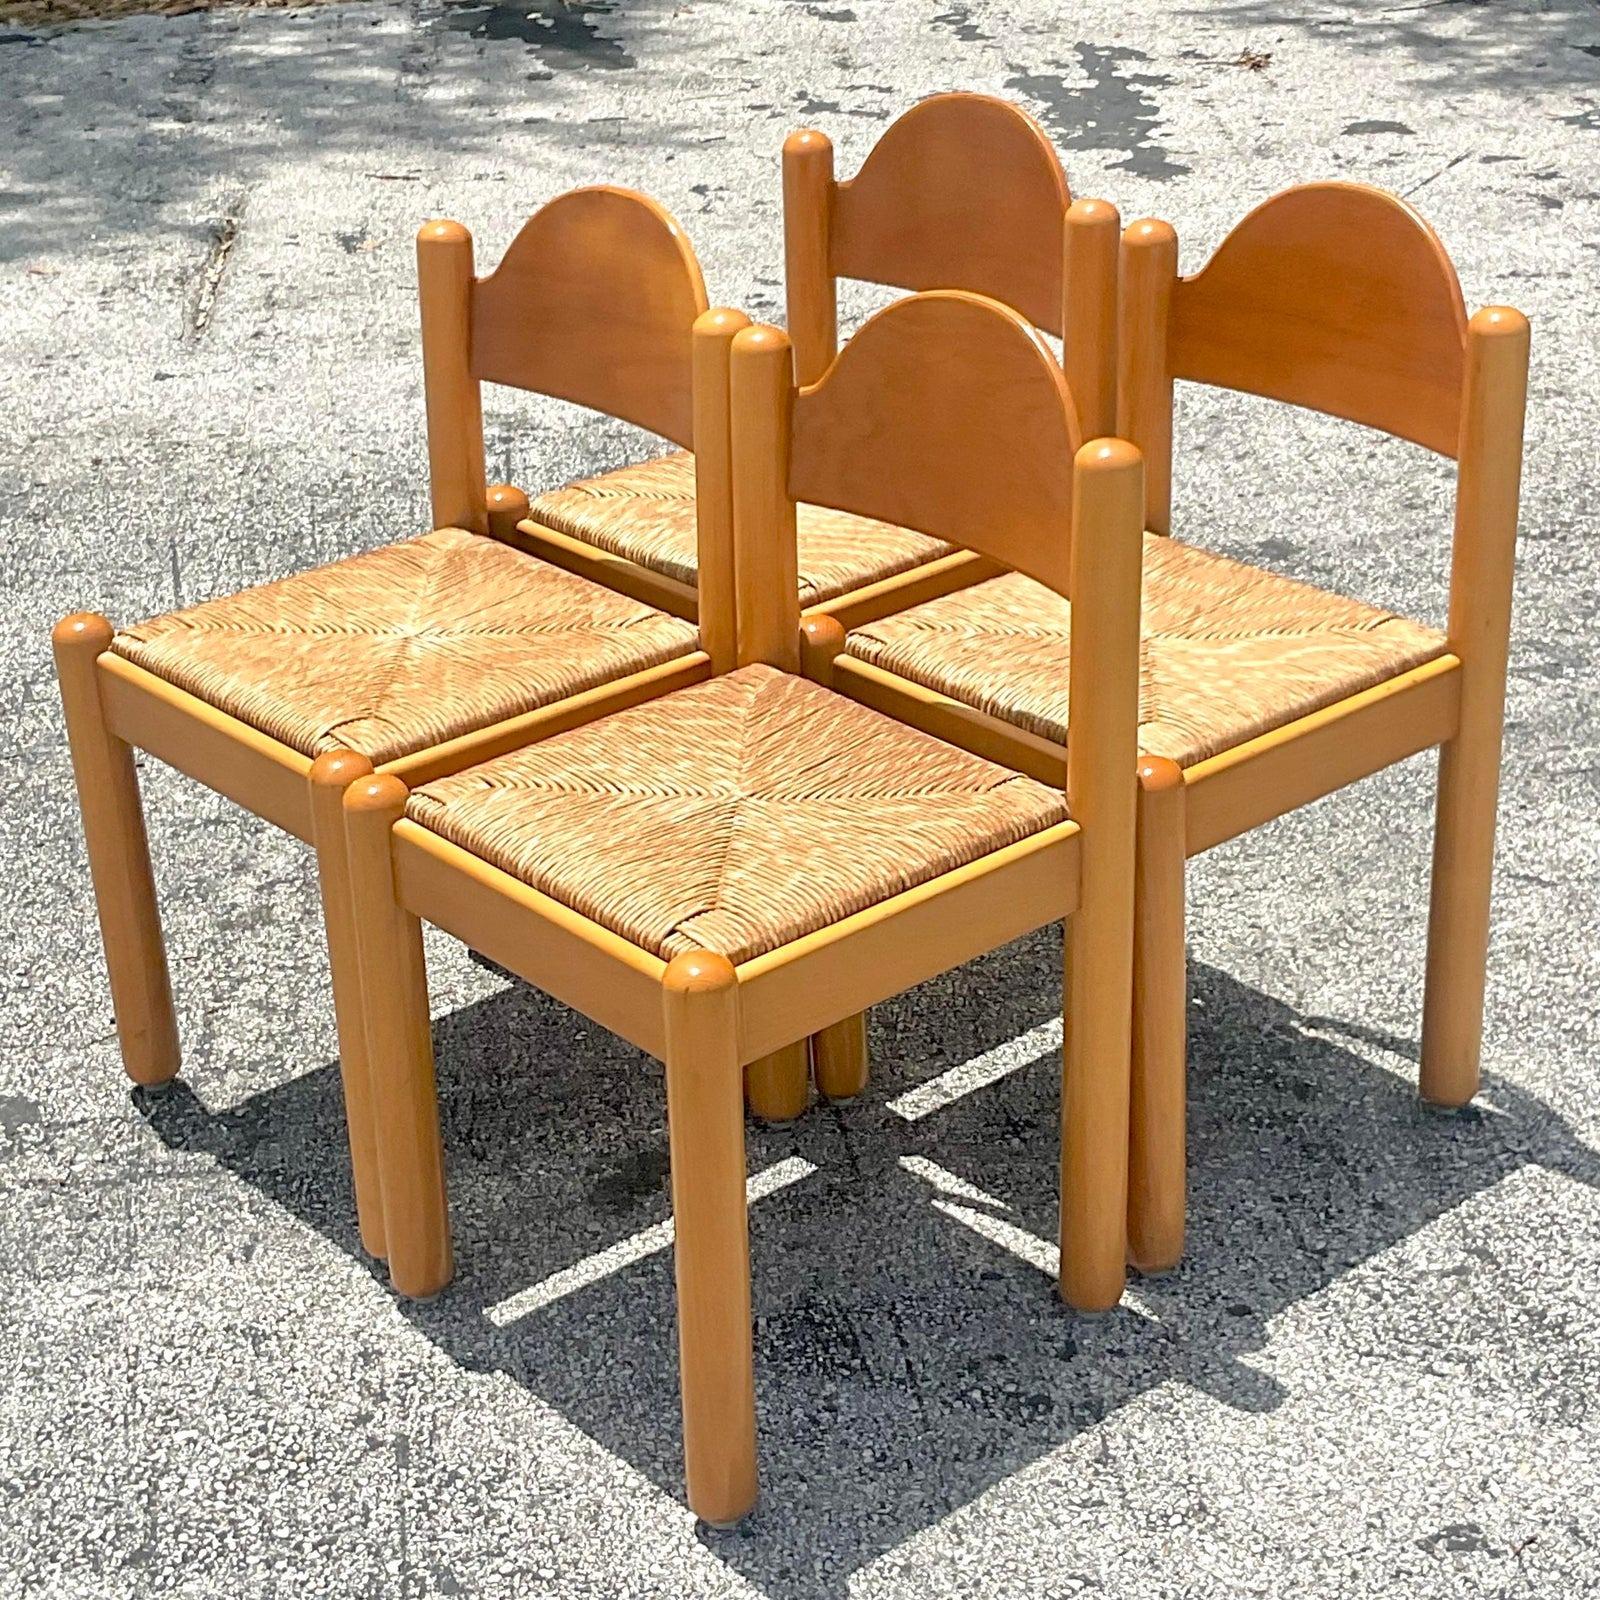 20th Century Vintage Boho Italian Padova Chairs After Hank Lowenstein - Set of 4 For Sale